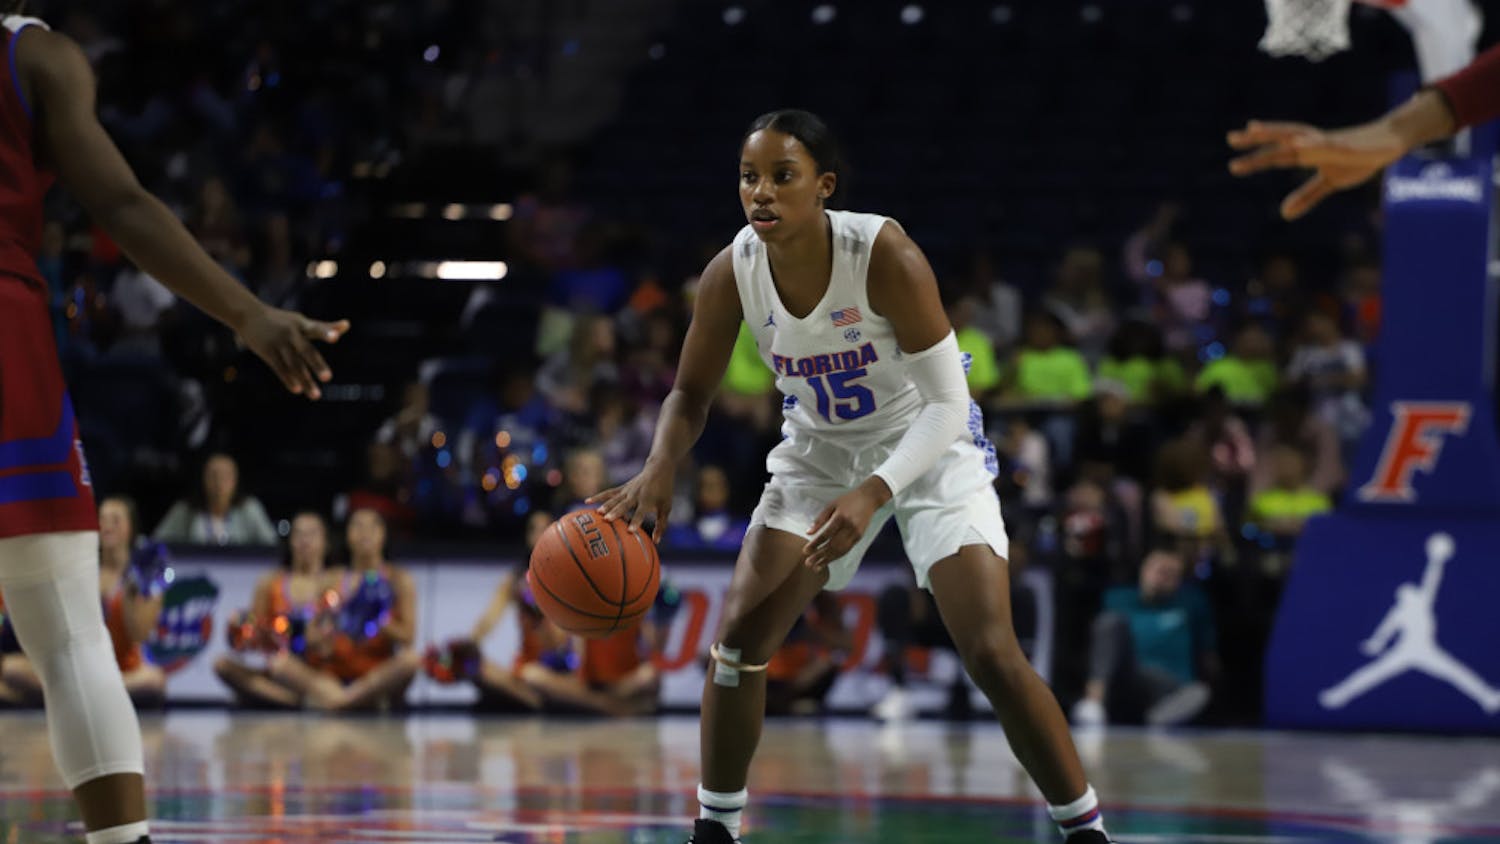 Sophomore Nina Rickards had nine points, eight rebounds and two assists in the Gators first game of the 2020-2021 season.